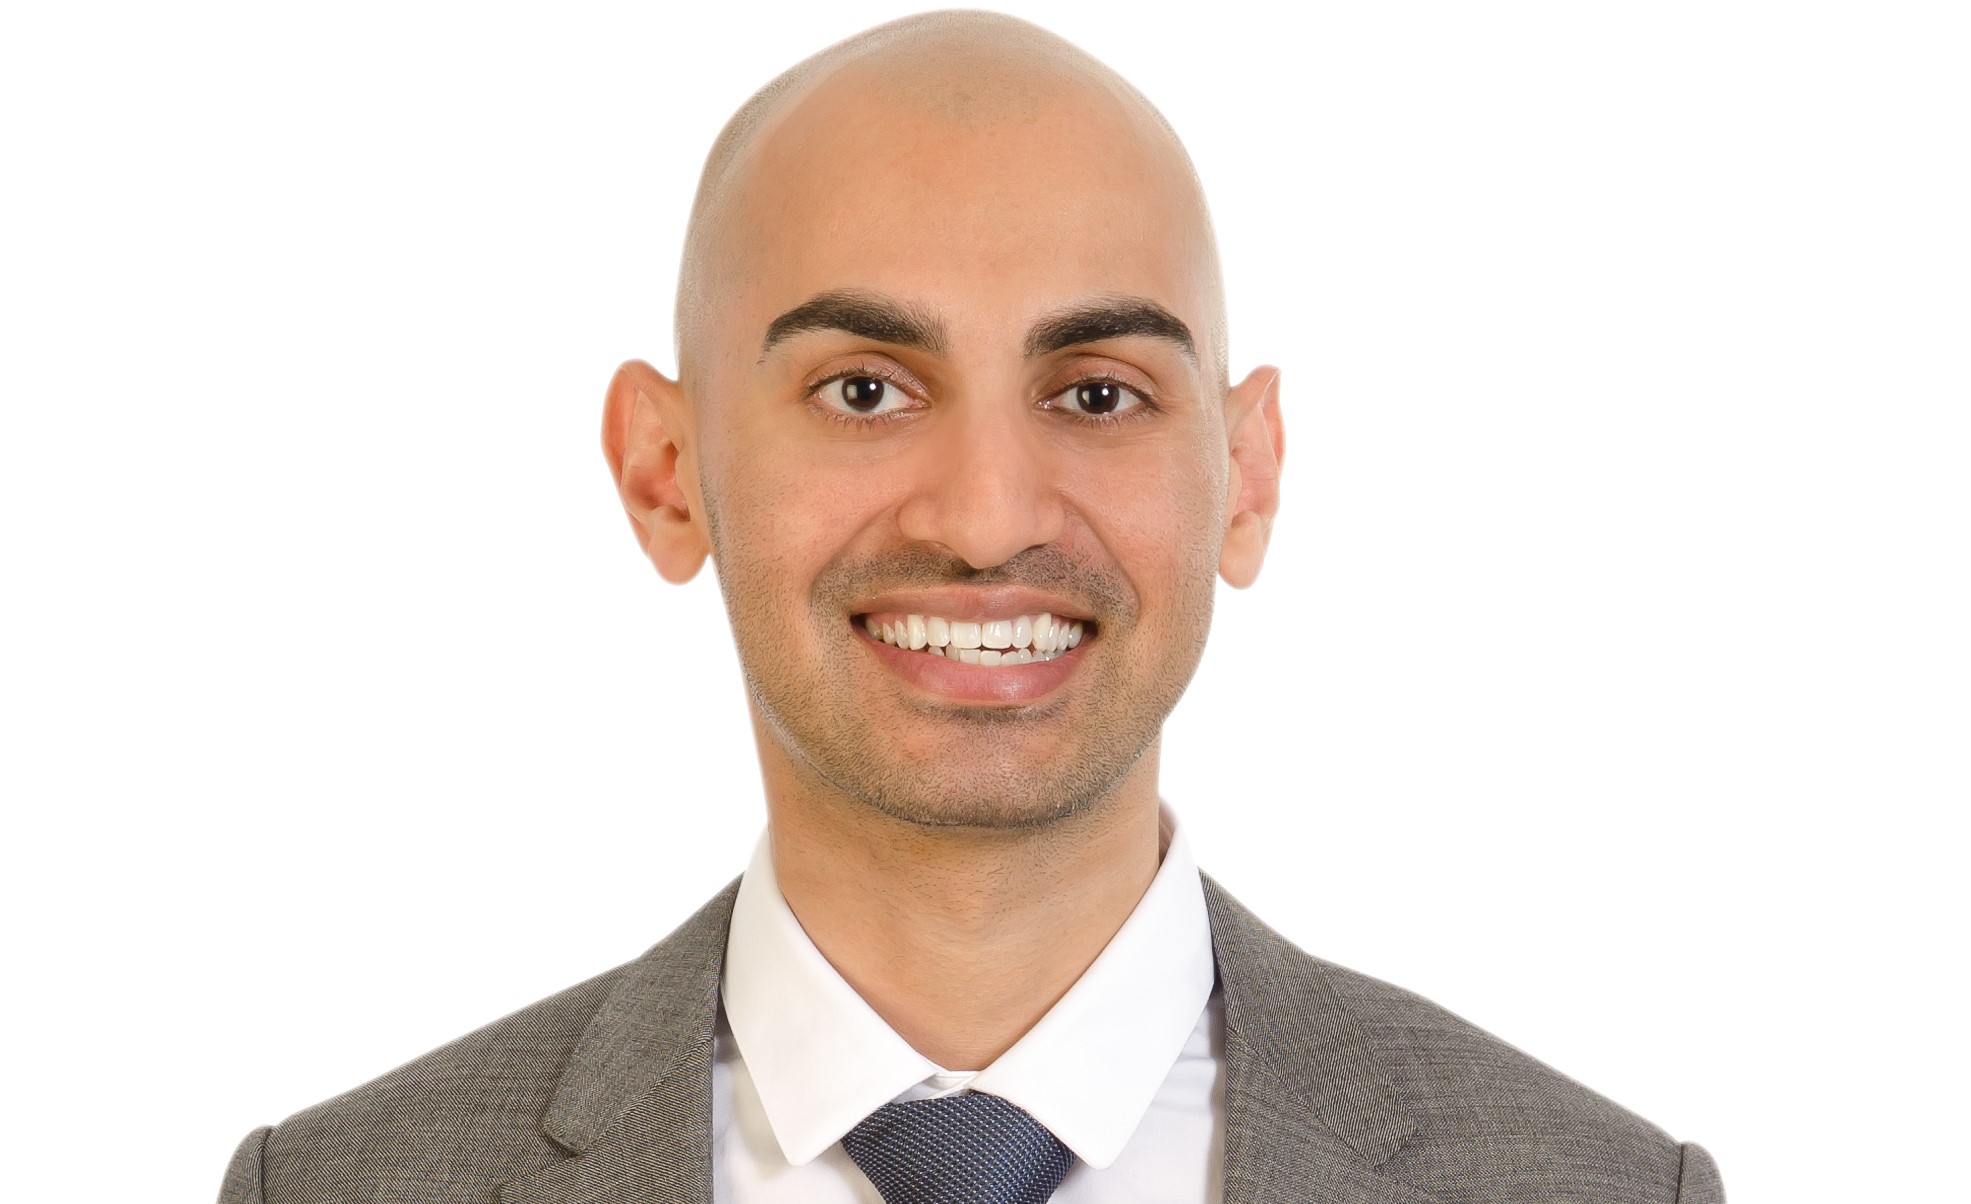 Neil Patel smiling and wearing a brown suit